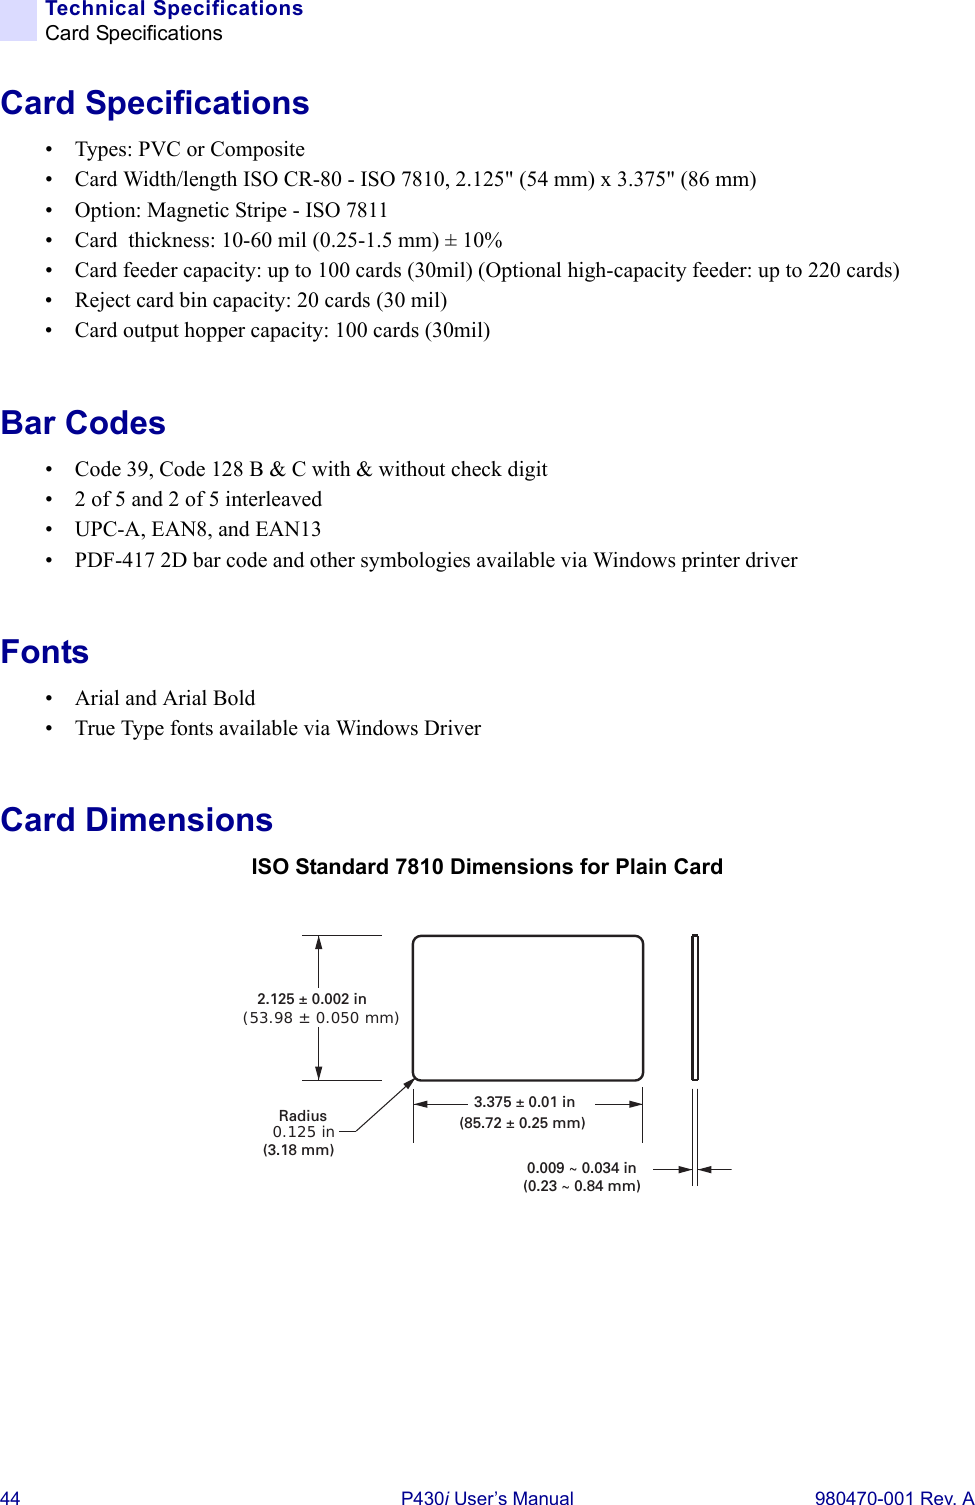 44 P430i User’s Manual 980470-001 Rev. ATechnical SpecificationsCard SpecificationsCard Specifications• Types: PVC or Composite• Card Width/length ISO CR-80 - ISO 7810, 2.125&quot; (54 mm) x 3.375&quot; (86 mm)• Option: Magnetic Stripe - ISO 7811 • Card  thickness: 10-60 mil (0.25-1.5 mm) ± 10%• Card feeder capacity: up to 100 cards (30mil) (Optional high-capacity feeder: up to 220 cards)• Reject card bin capacity: 20 cards (30 mil)• Card output hopper capacity: 100 cards (30mil)Bar Codes• Code 39, Code 128 B &amp; C with &amp; without check digit• 2 of 5 and 2 of 5 interleaved• UPC-A, EAN8, and EAN13• PDF-417 2D bar code and other symbologies available via Windows printer driverFonts• Arial and Arial Bold• True Type fonts available via Windows DriverCard DimensionsISO Standard 7810 Dimensions for Plain Card0.125 inRadius(3.18 mm)3.375 ± 0.01 in(85.72 ± 0.25 mm)2.125 ± 0.002 in(53.98 ± 0.050 mm)0.009 ~ 0.034 in(0.23 ~ 0.84 mm)